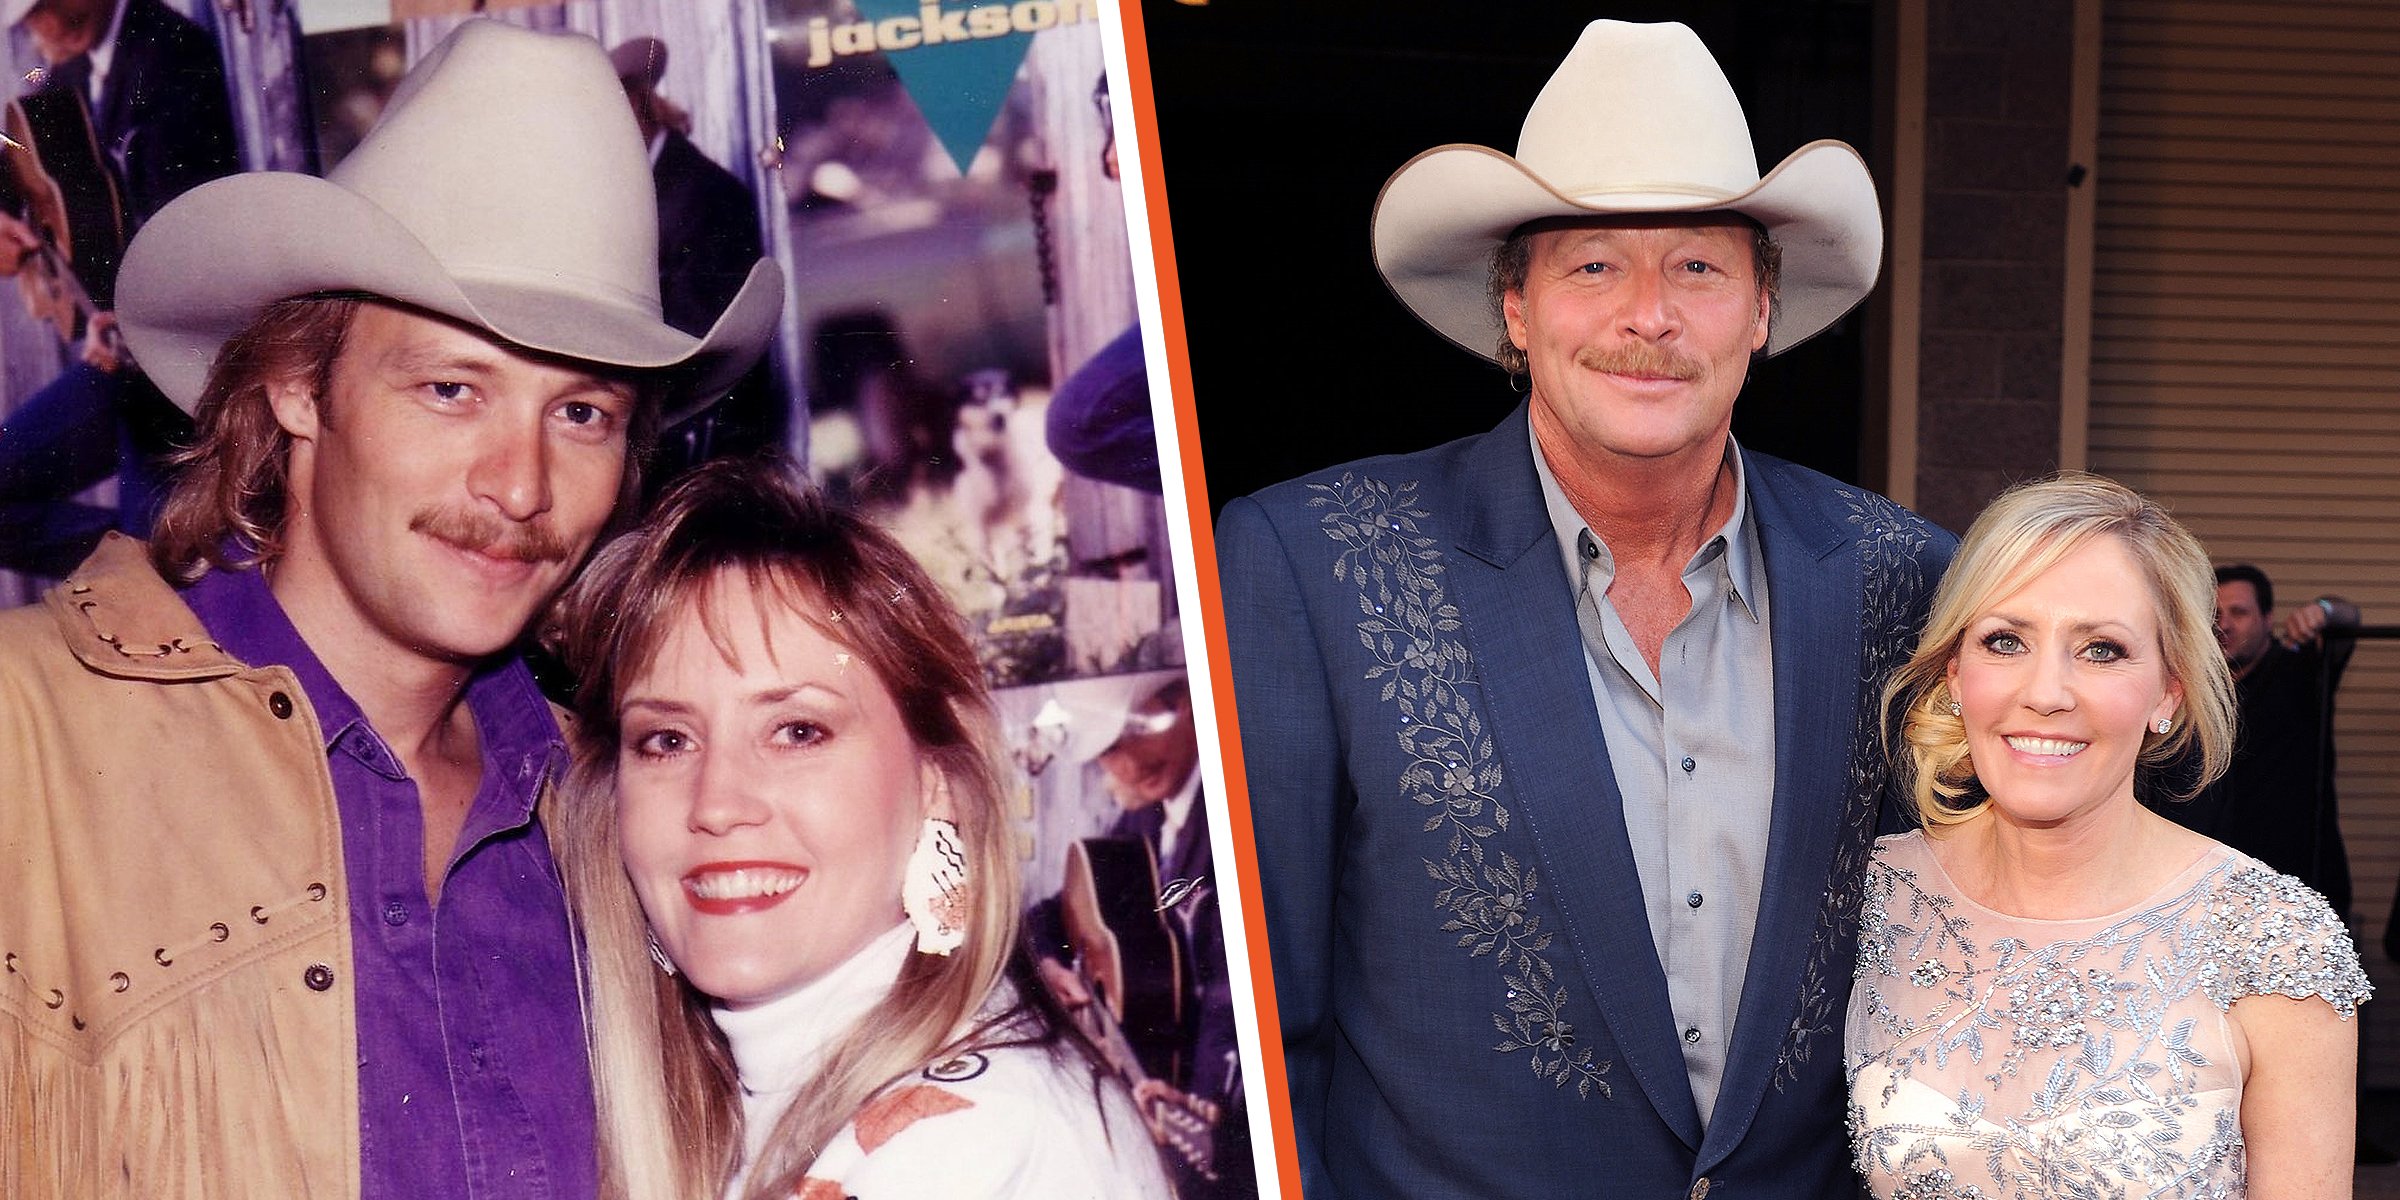 Getty Images - Instagram.com/officialalanjackson